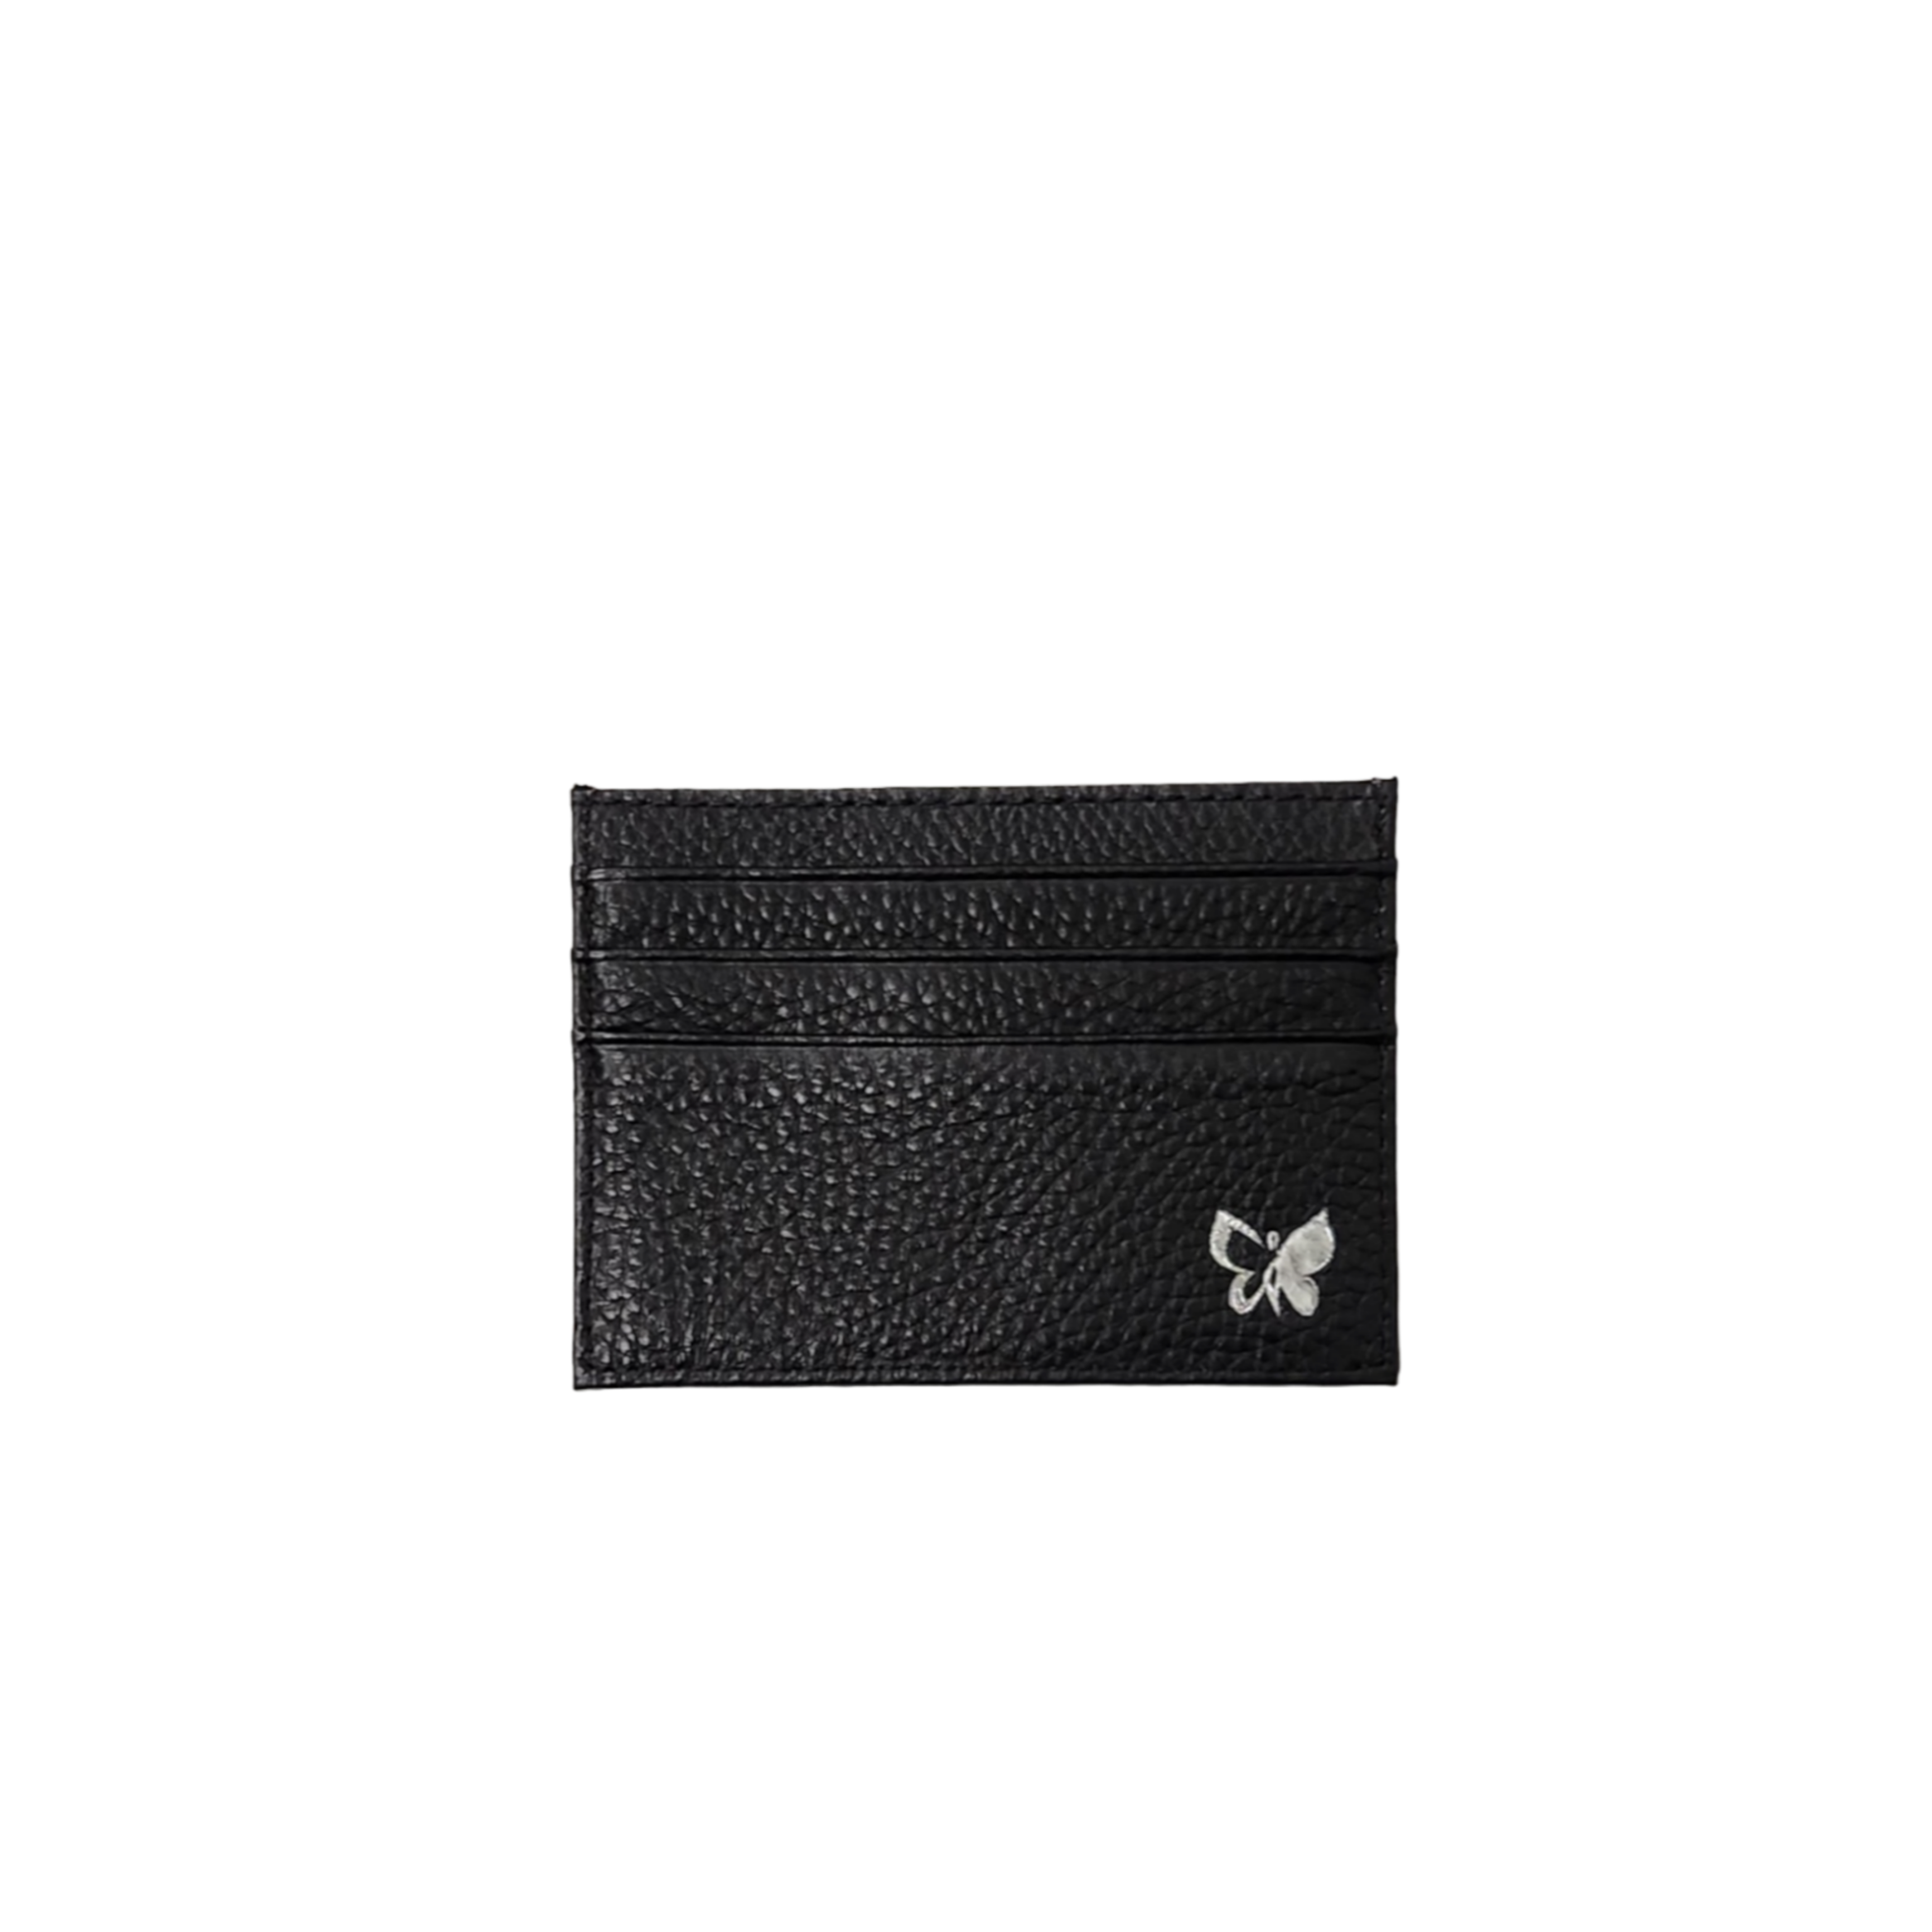 Diva on the Move Card Holder - I.L.M.B. Fitness